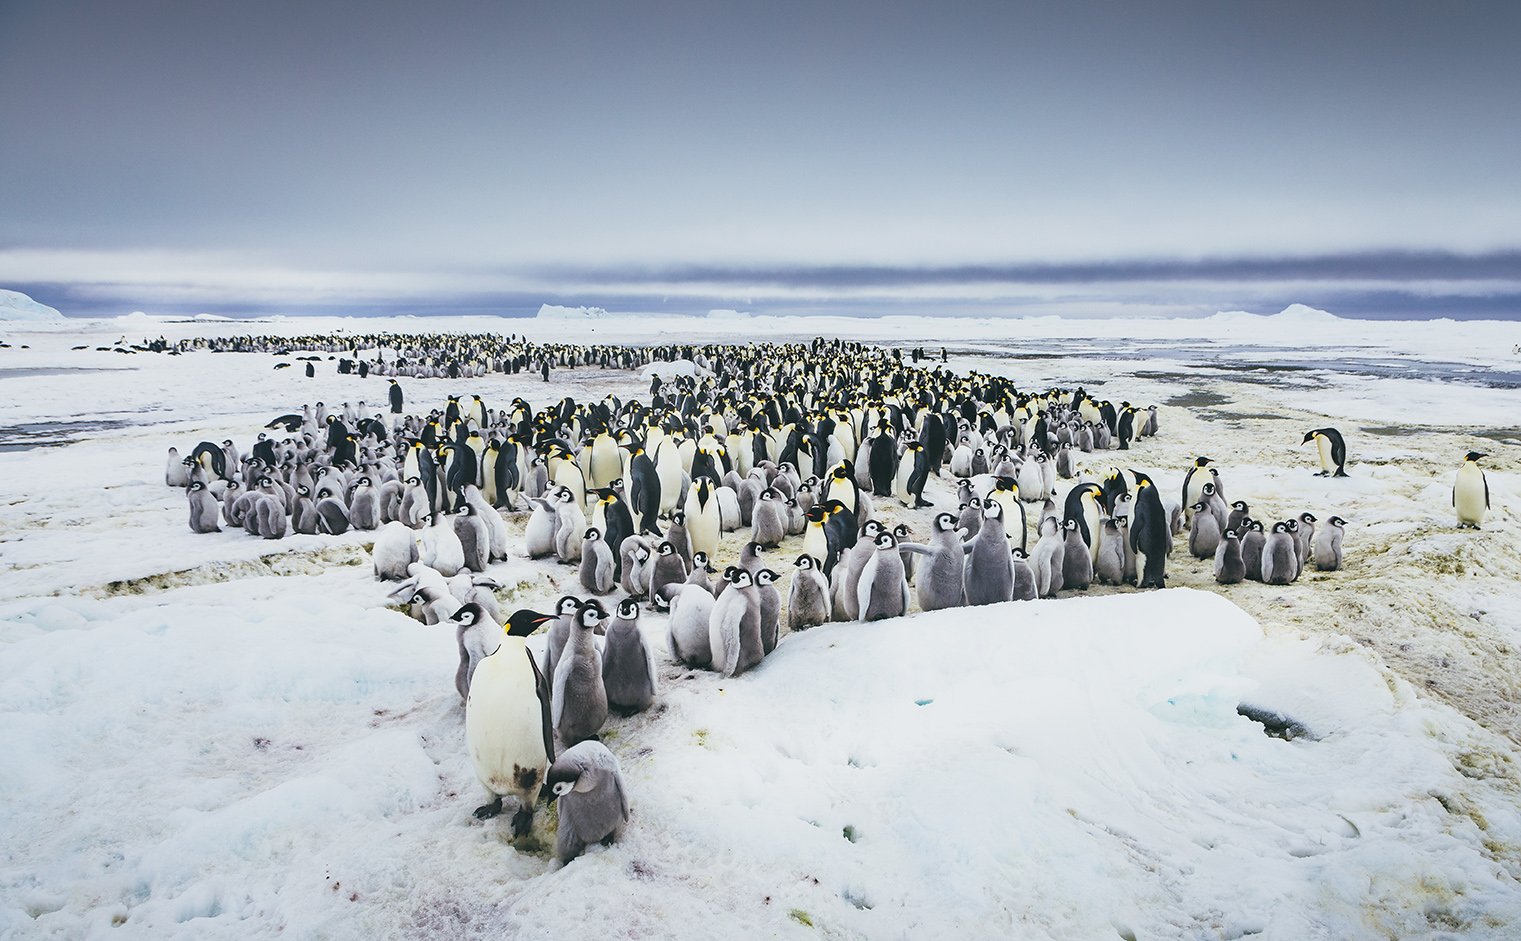 A rookery of thousands of emperor penguins and their chicks at Snow Hill Island.